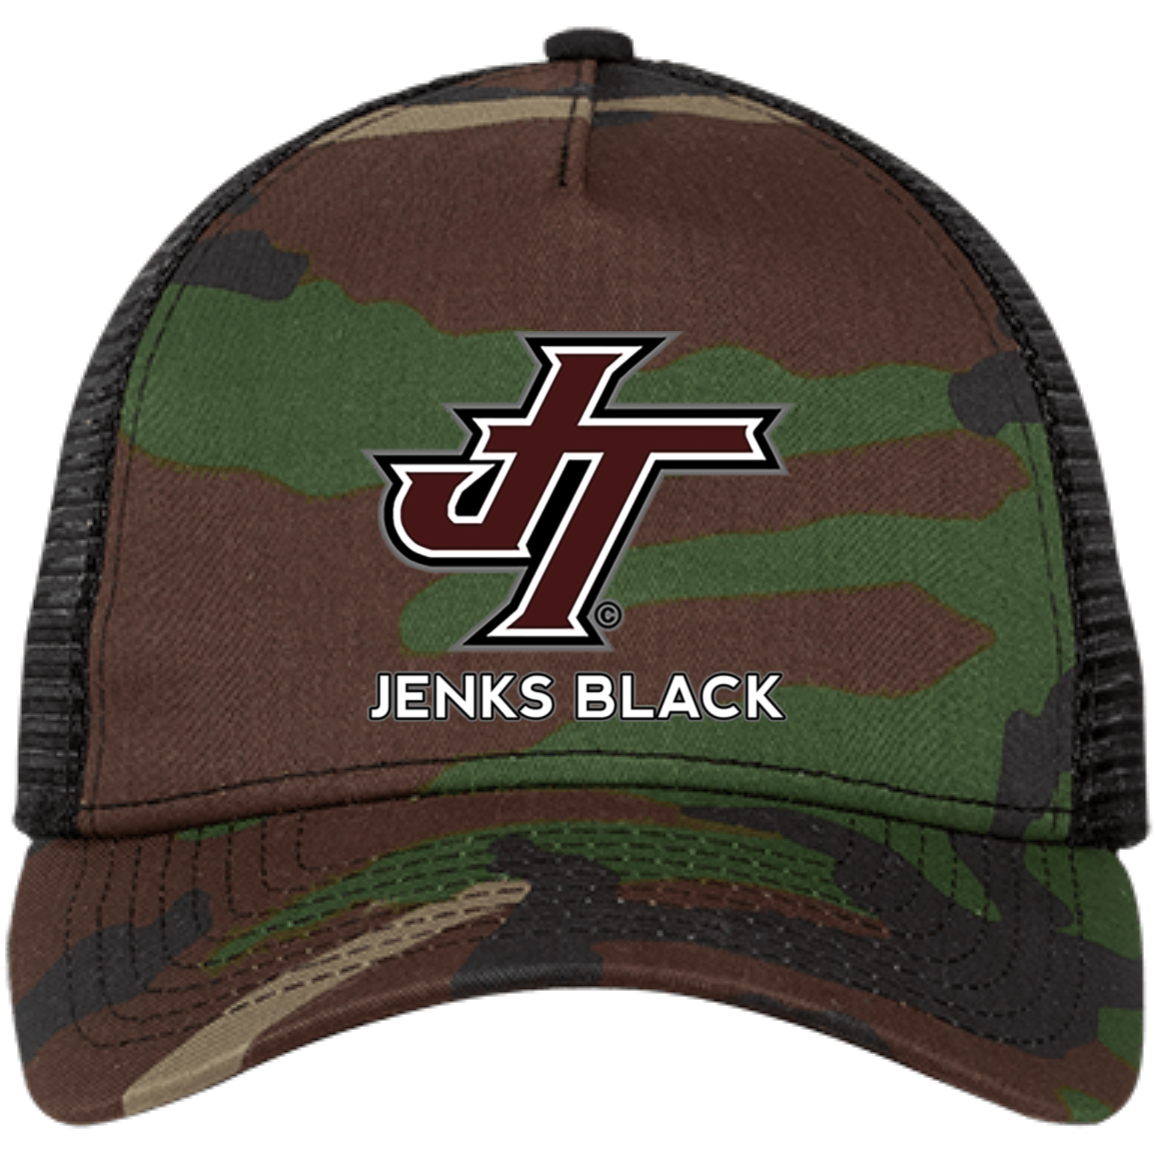 JT Embroidered Snapback Trucker Cap